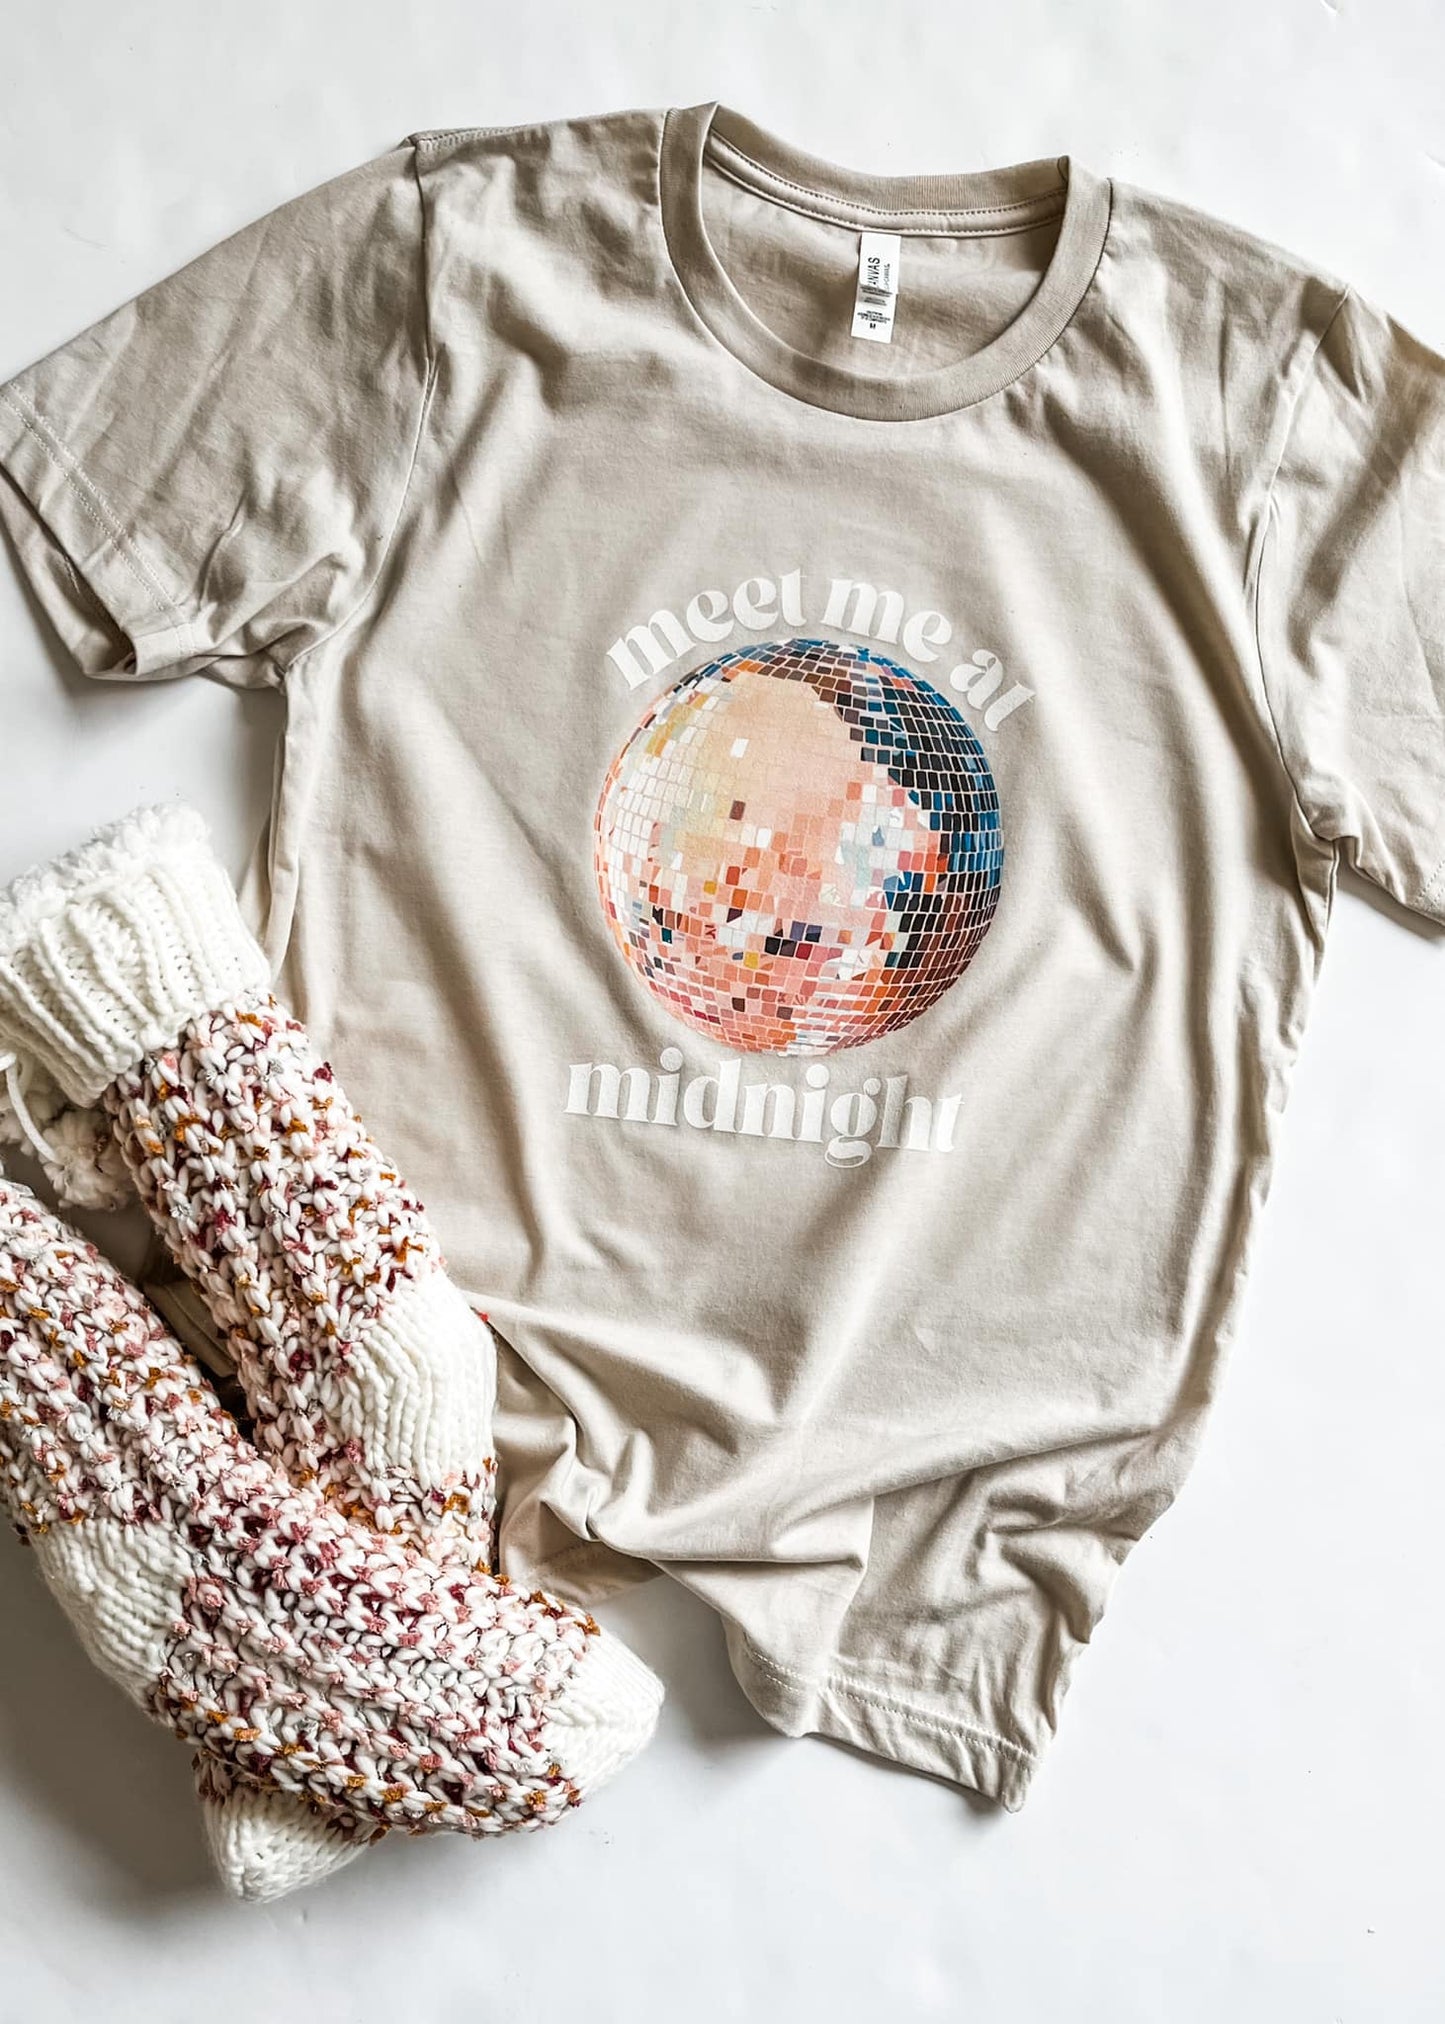 Meet Me at Midnight | Adult Tee-Adult Tee-Sister Shirts-Sister Shirts, Cute & Custom Tees for Mama & Littles in Trussville, Alabama.